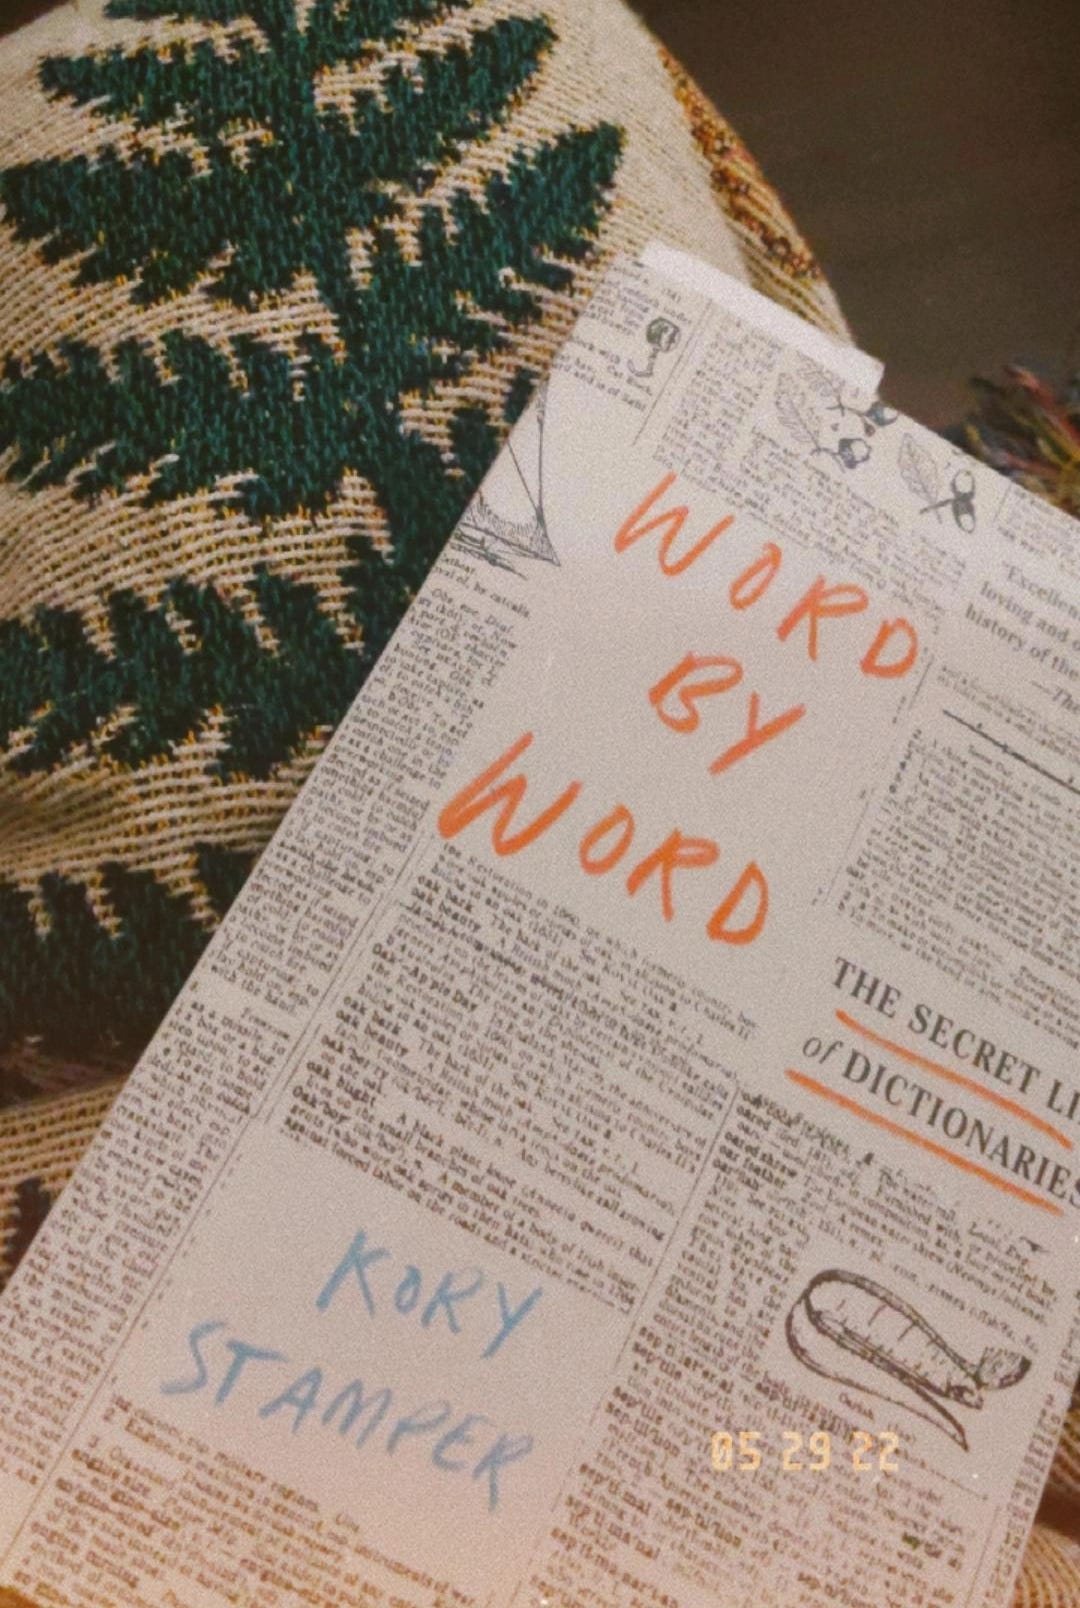 The book Word by Word, on a blanket embroidered in the shape of a fern leaf